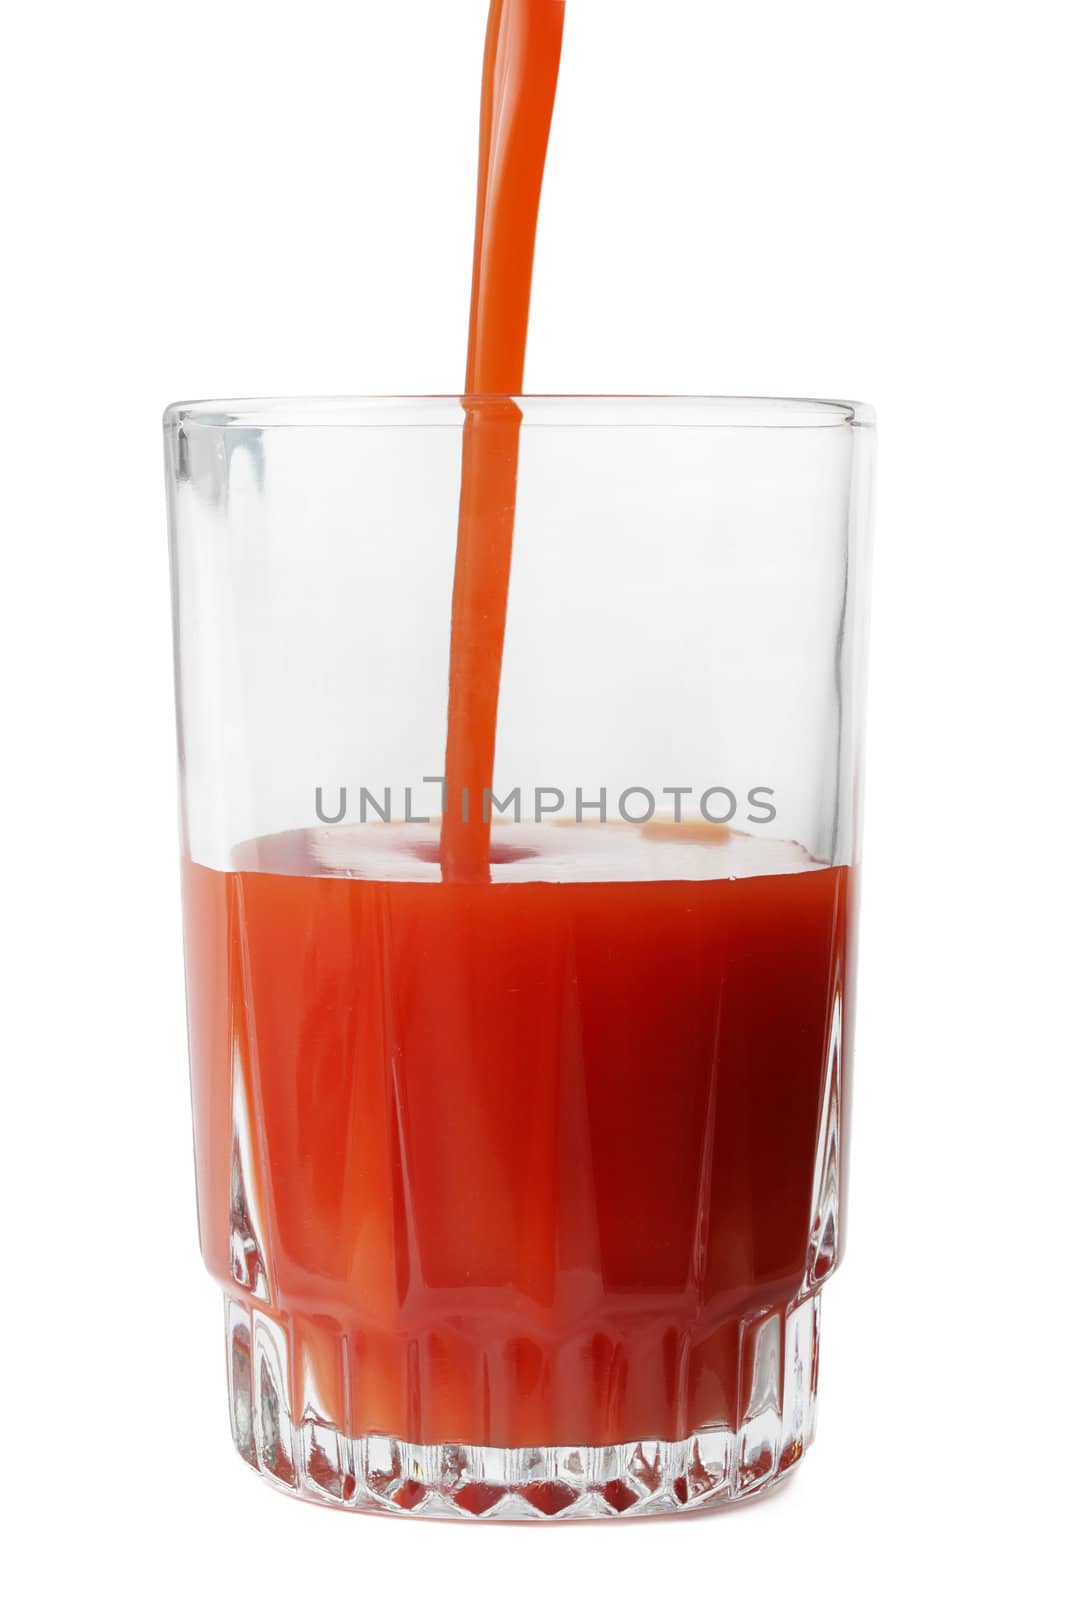 tomato juice by lanalanglois